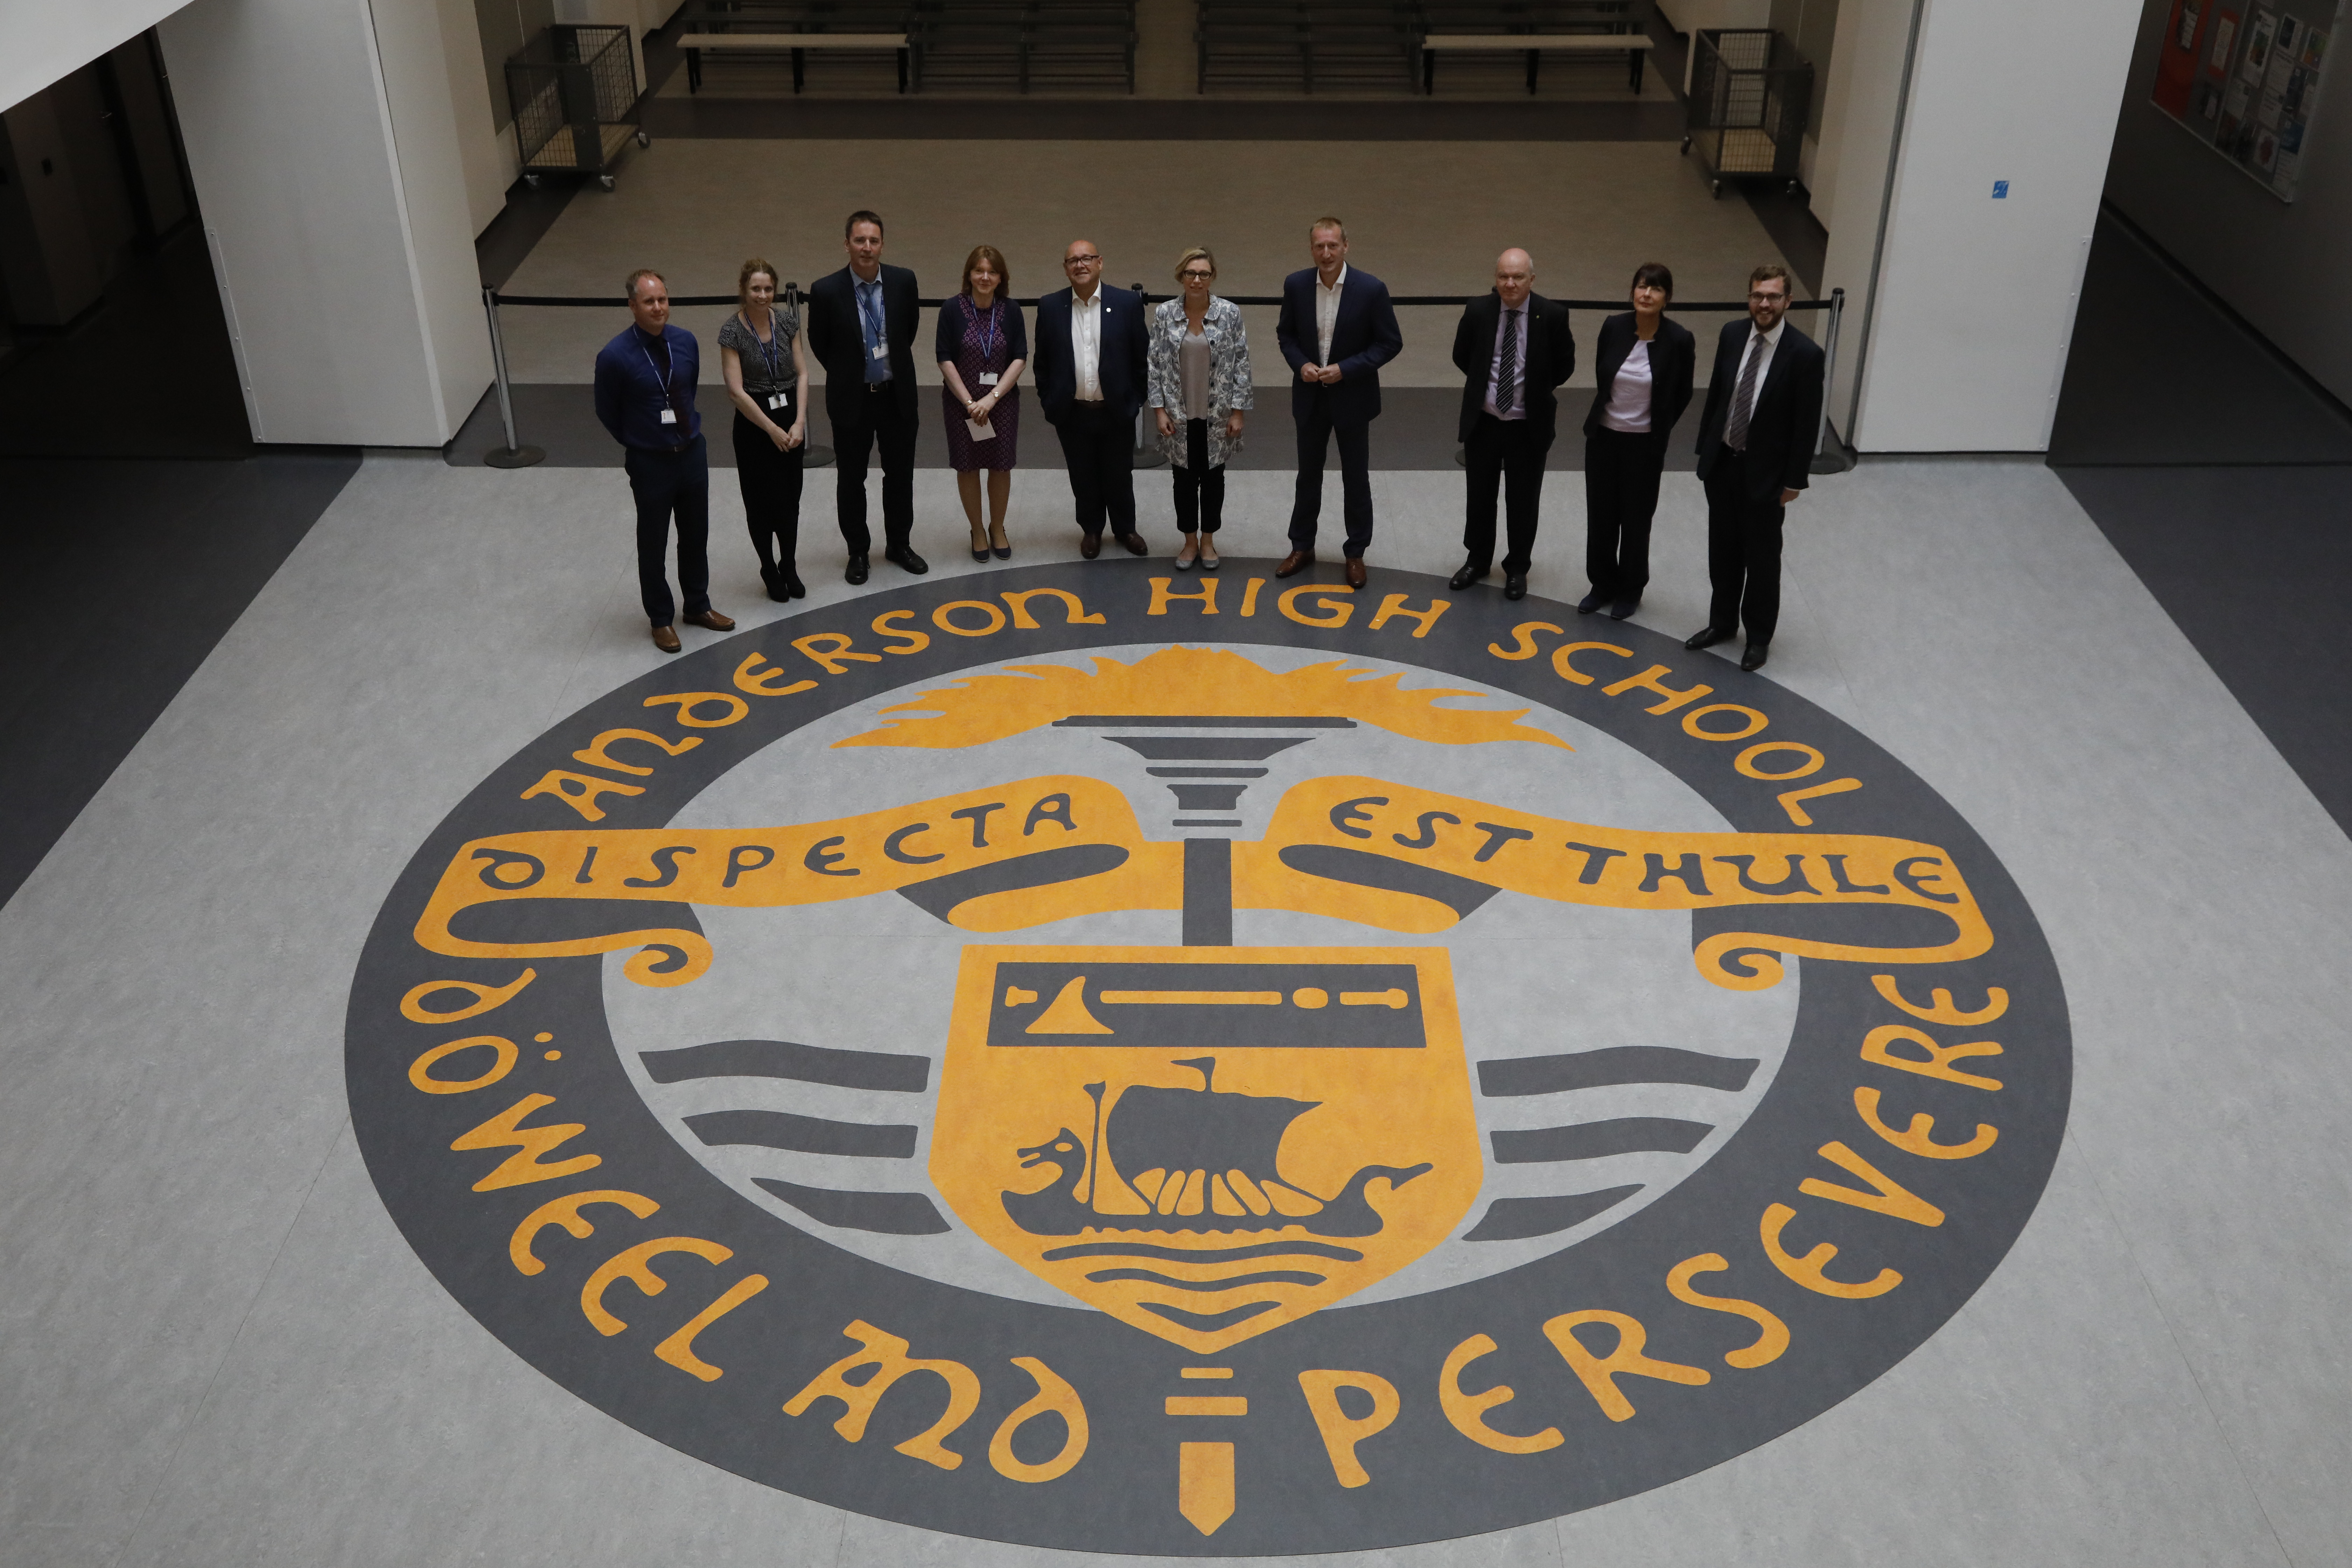 Image is taken from above. It looks down from the first floor to Members of the Education and Skills Committee who are on the ground floor in a large entrance area. Members of the Committee are standing behind a large circular school crest which is embedded in the flooring. The crest has the words 'Anderson High School' and the motto 'Do weel and persevere'.